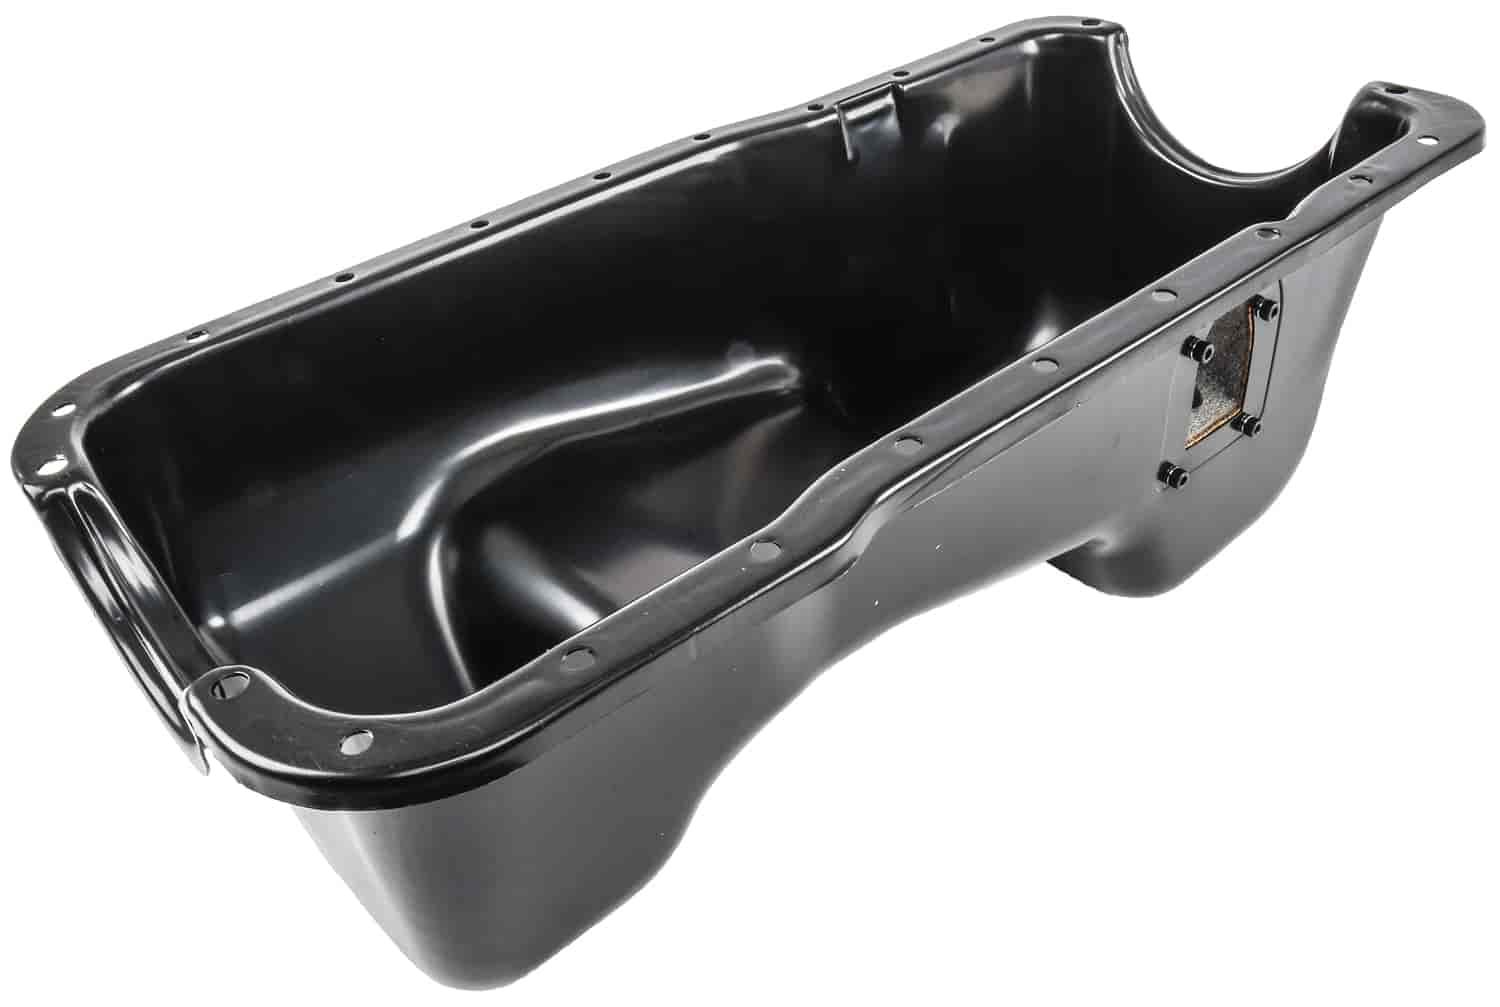 Oil Pan Kit for Ford 351W 5.8L